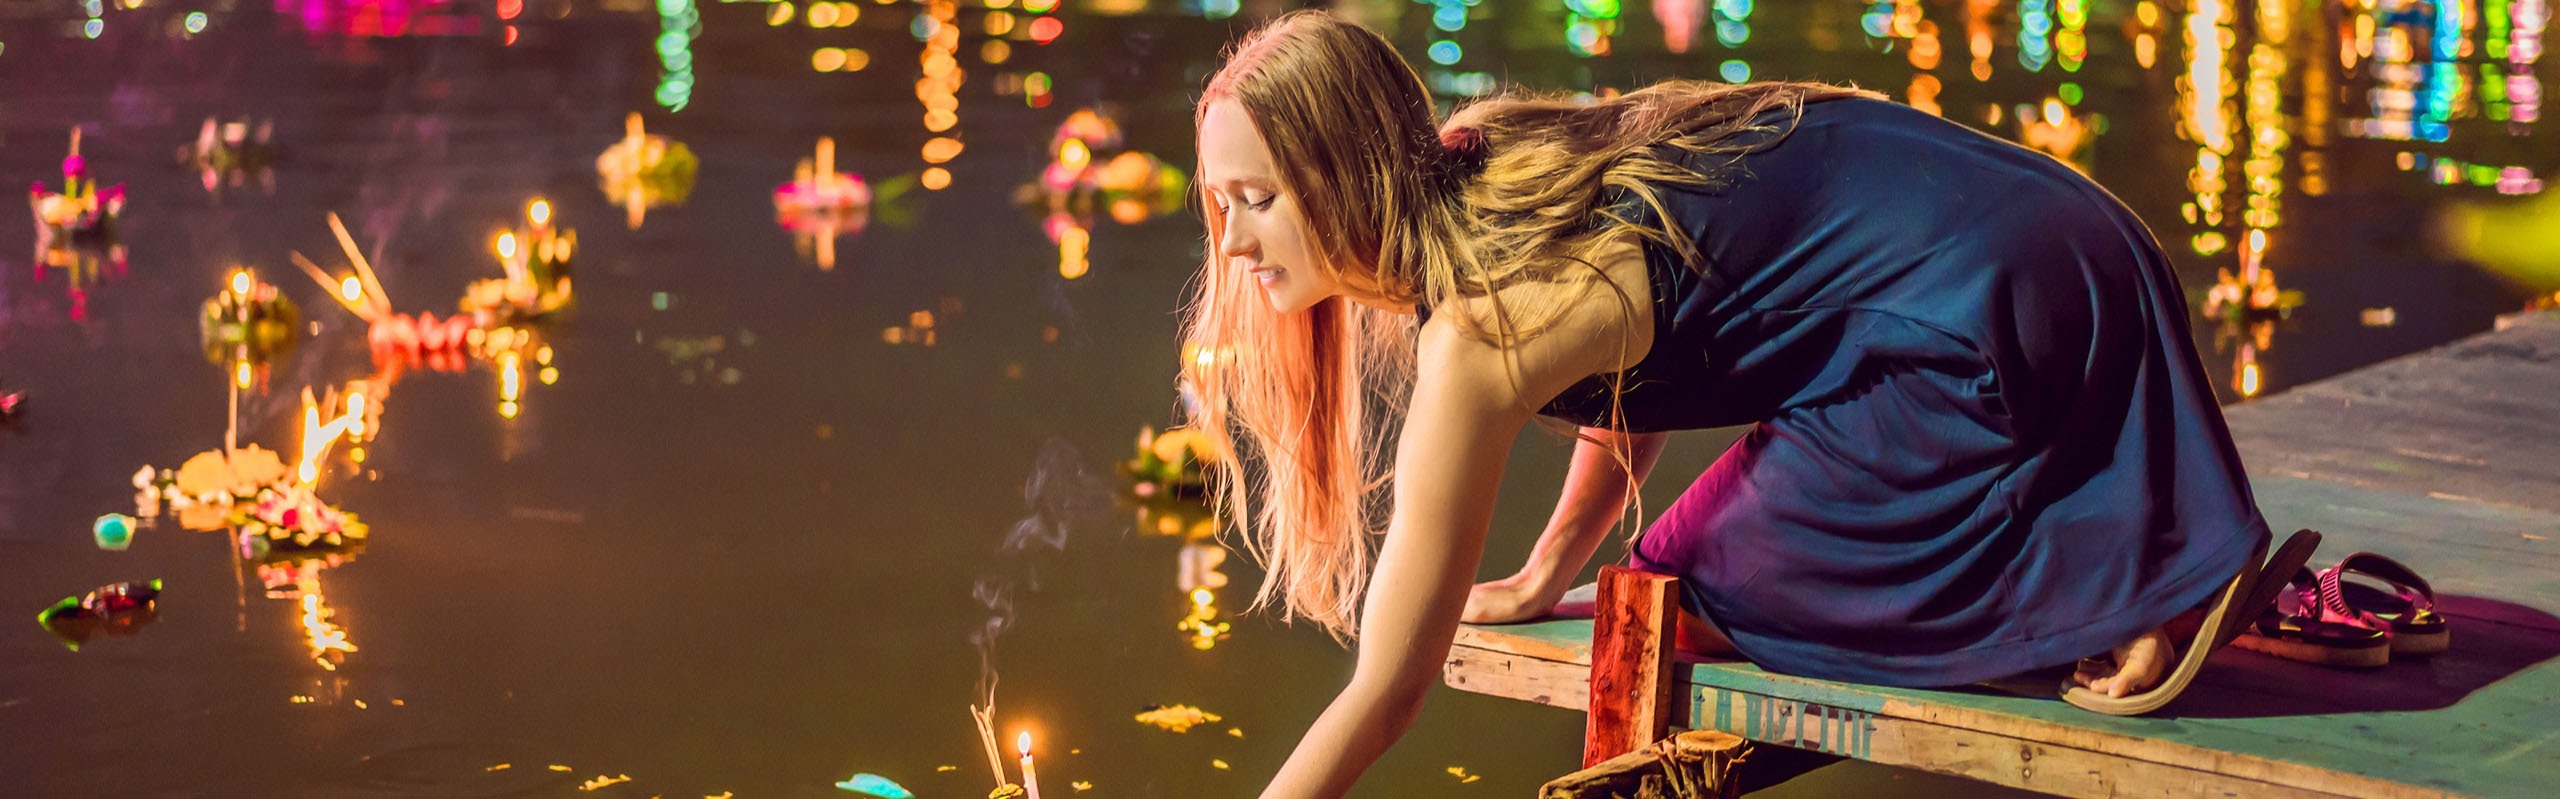 Loy Krathong Festival: Date, Meaning, Traditions